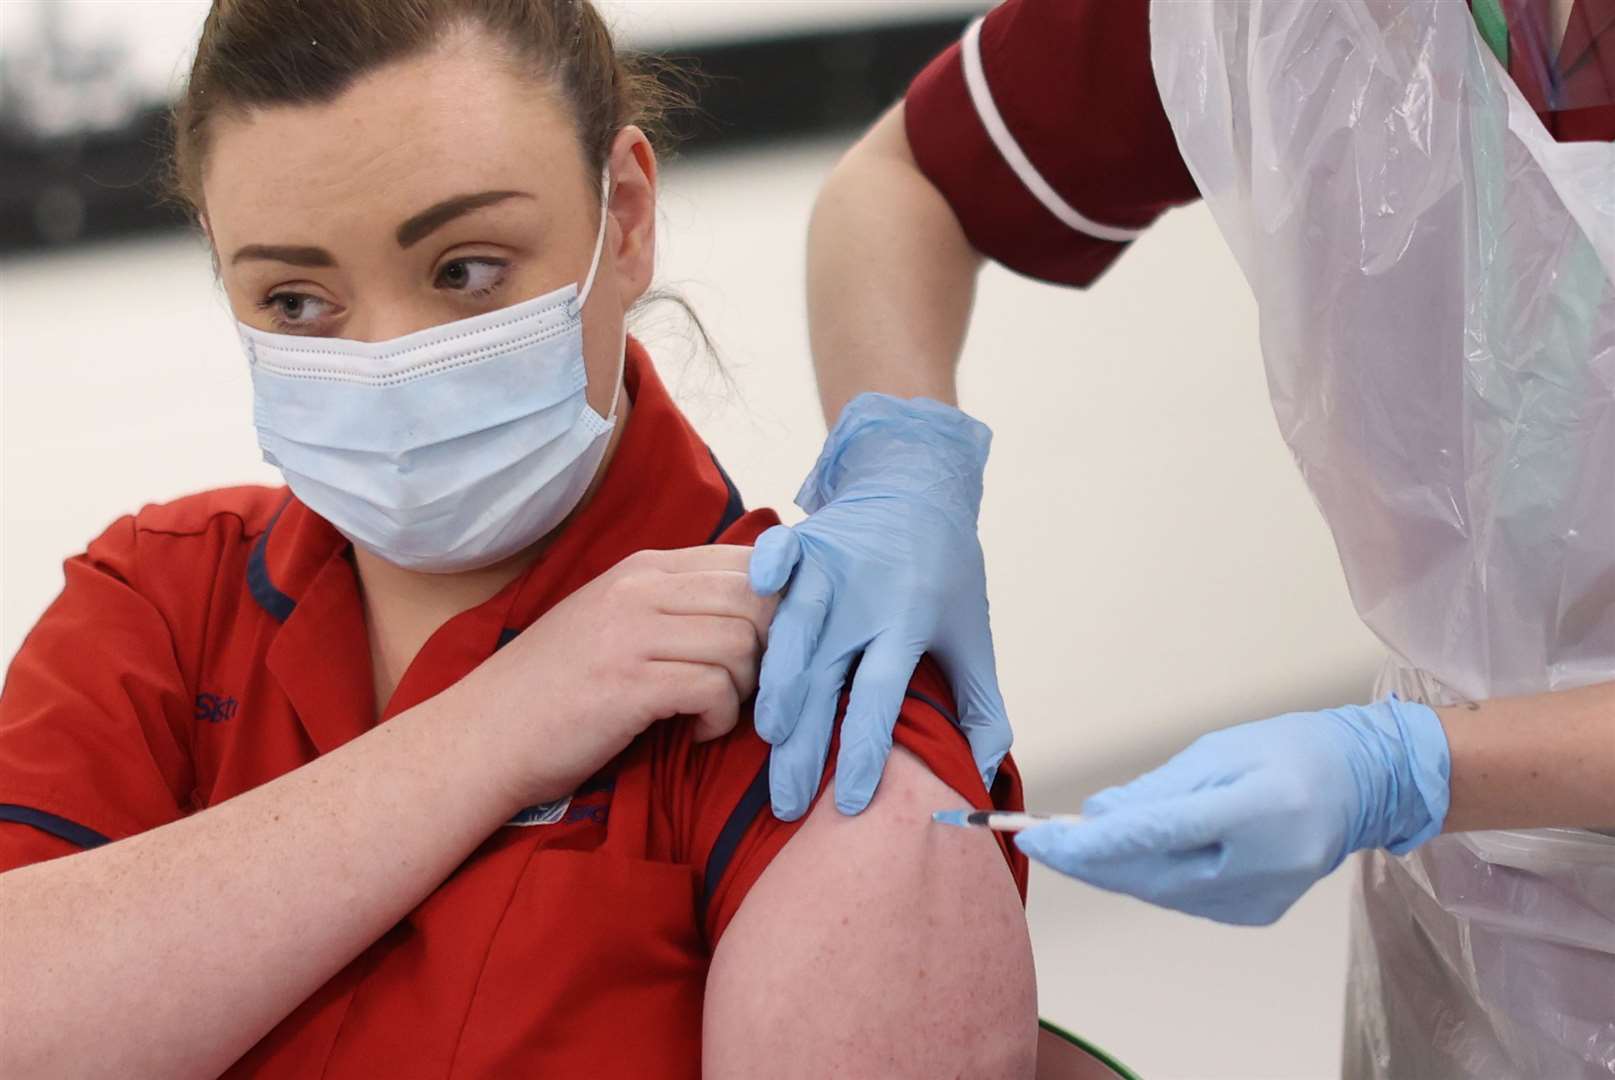 Nurse Joanna Sloan becomes the first person in Northern Ireland to receive the first of two Pfizer/BioNTech Covid-19 vaccine jabs, at the Royal Victoria Hospital, in Belfast on December 8 (Liam McBurney/PA)